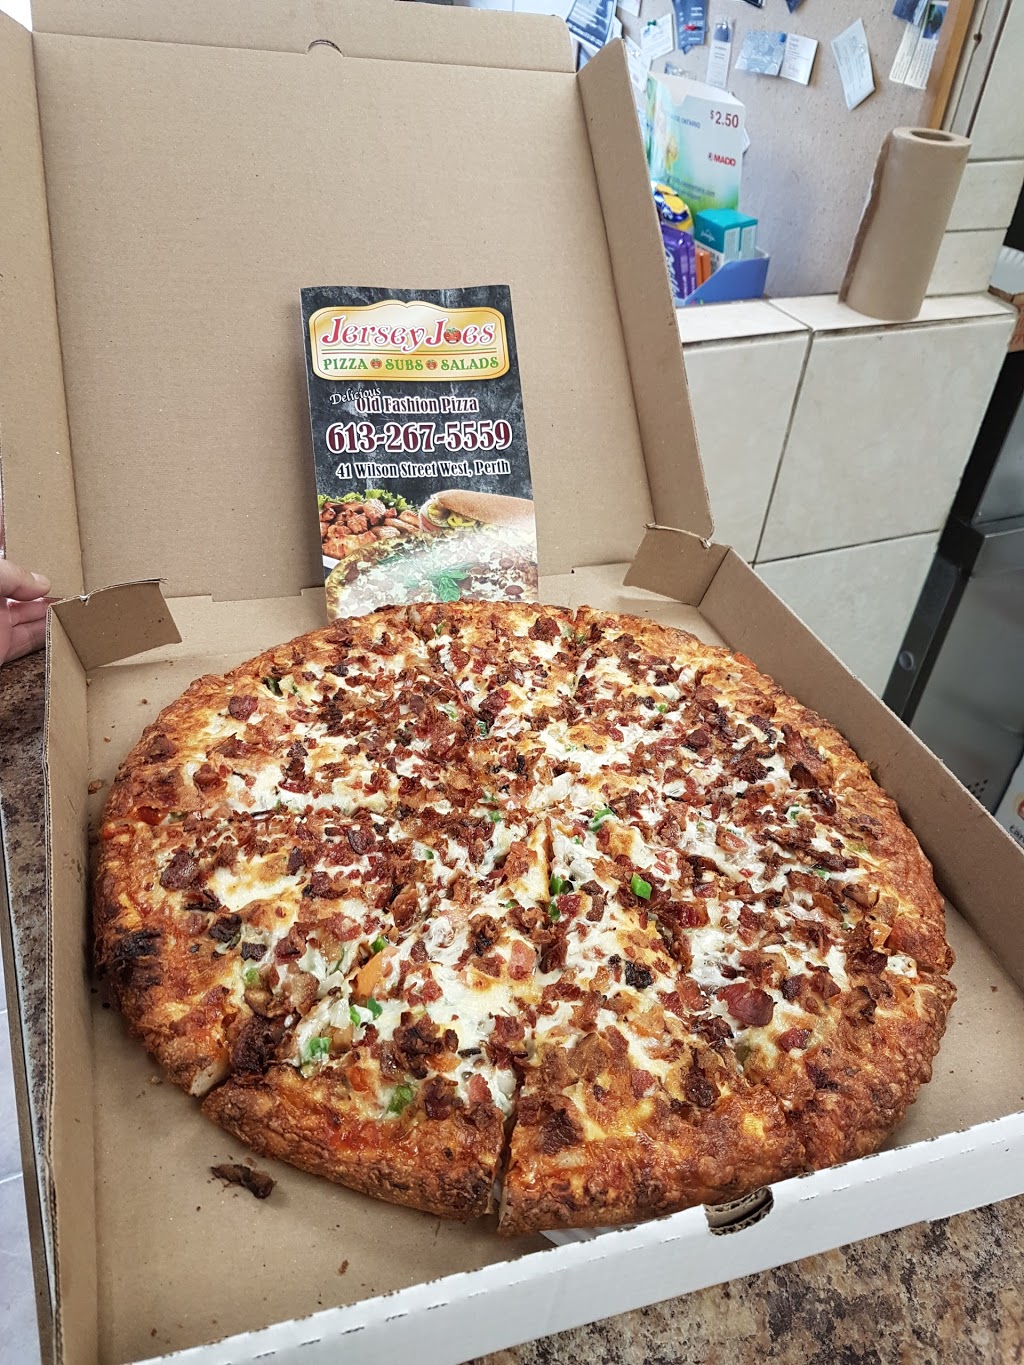 Jersey Joes Pizza & Subs | 41 Wilson St W, Perth, ON K7H 2N1, Canada | Phone: (613) 267-5559